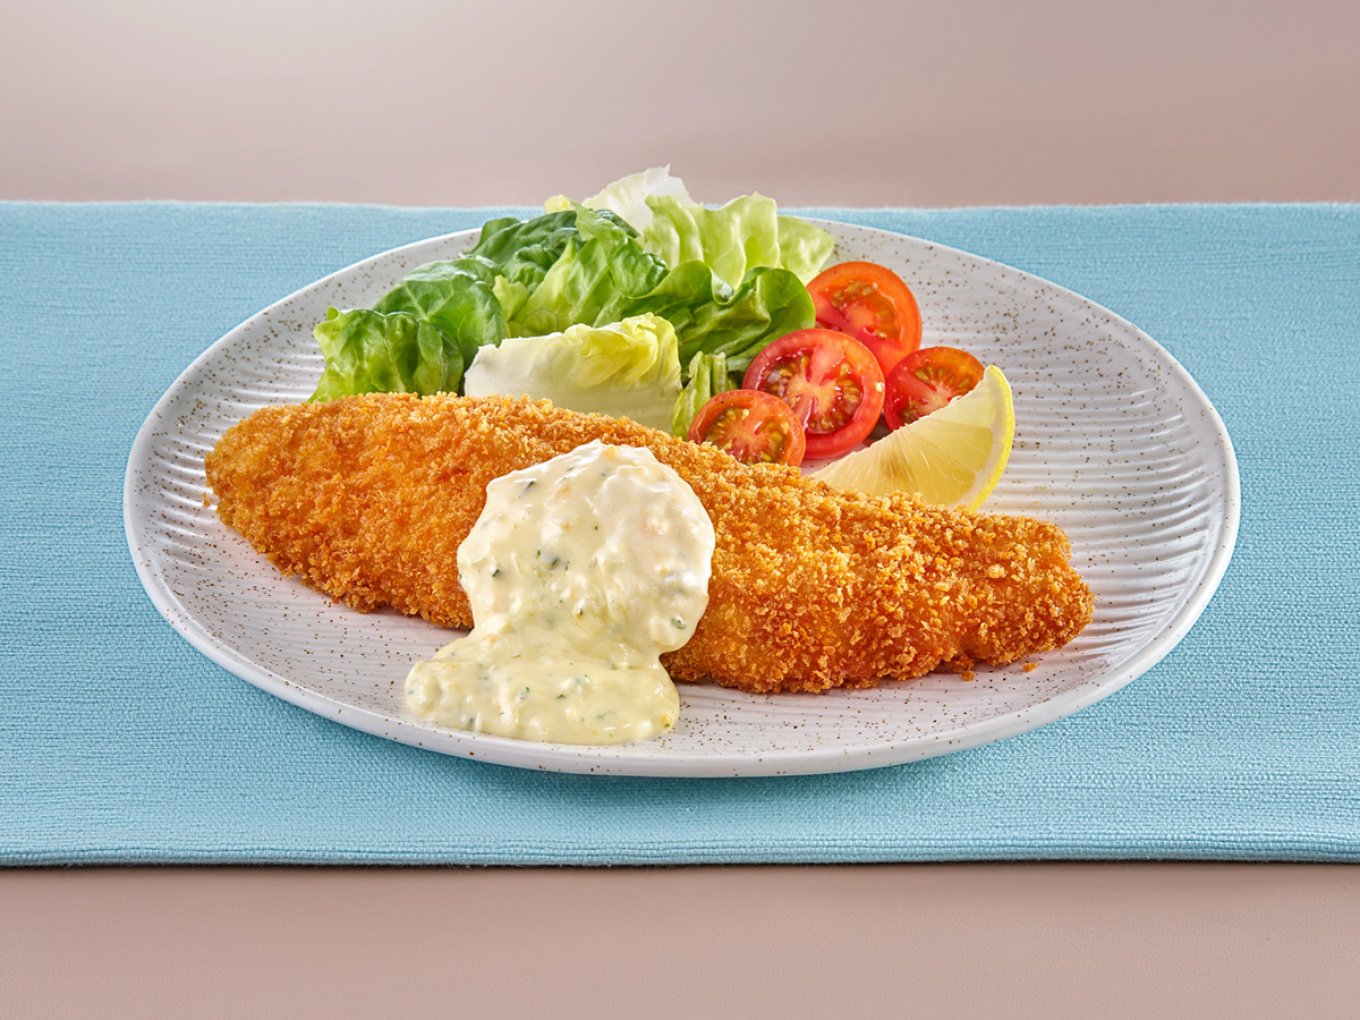 Fried Breaded Fish with Tartar Sauce